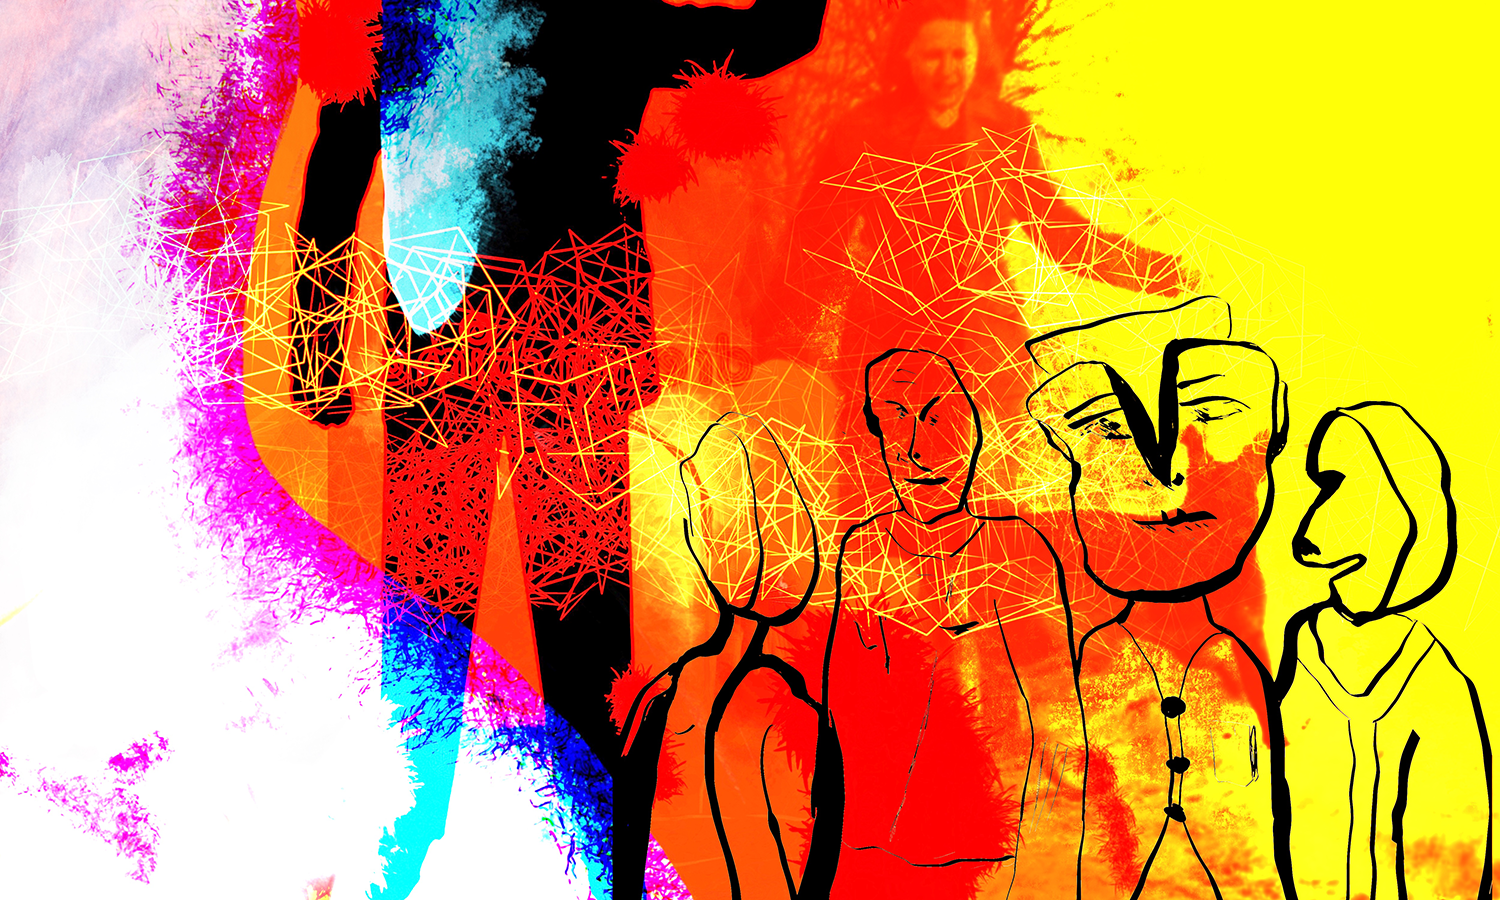 Multi-colored background, figures